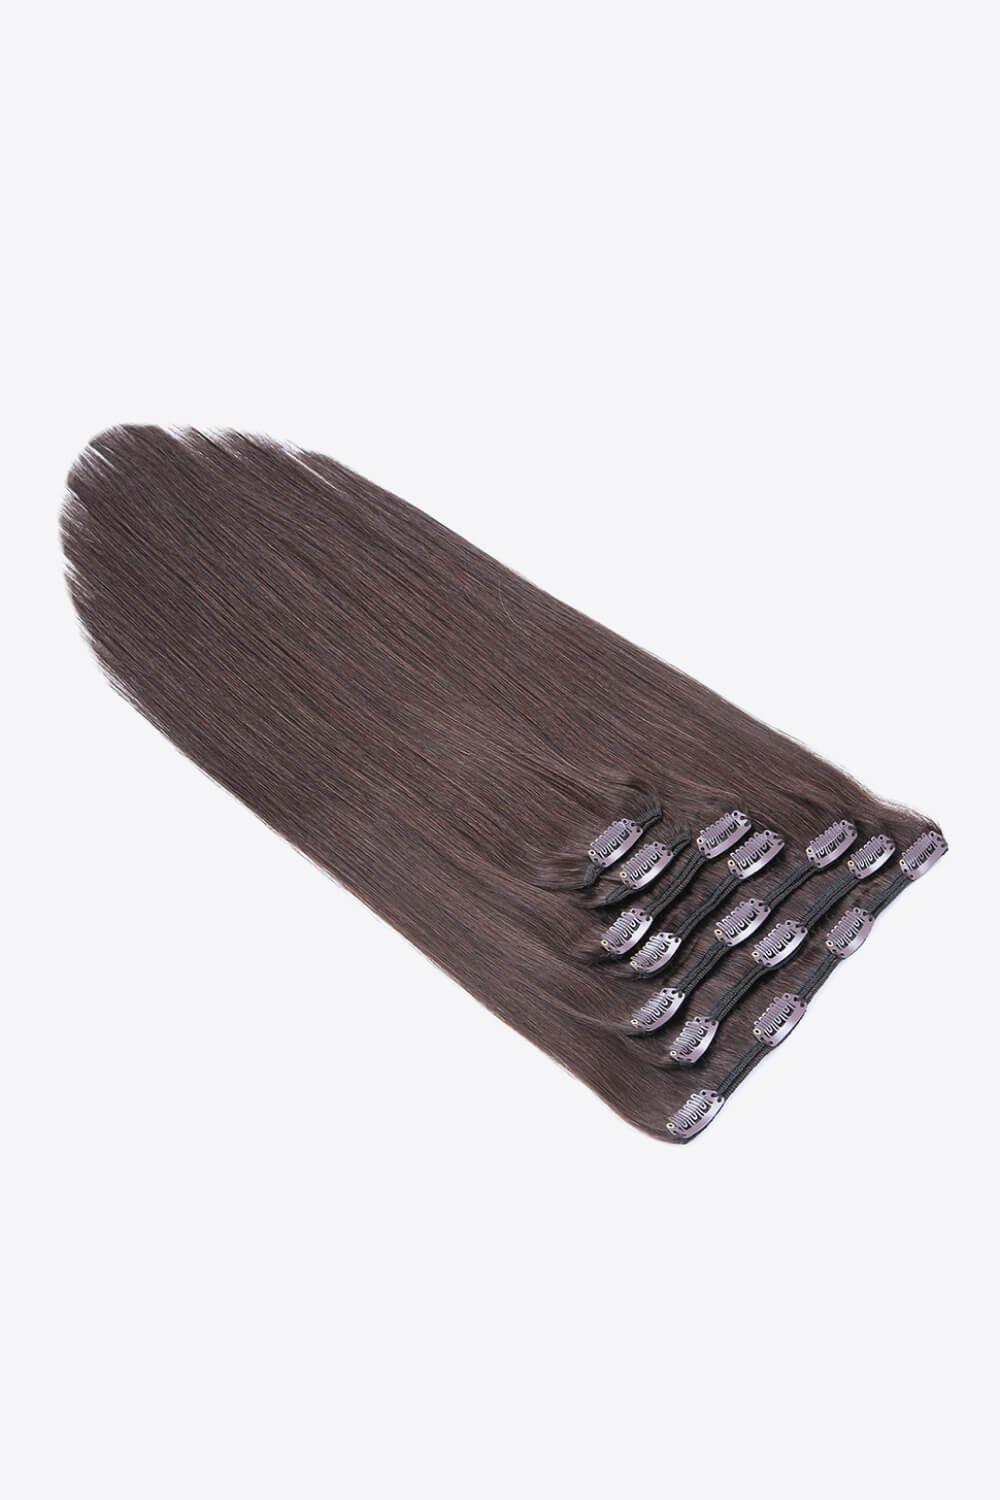 Clip-In Indian Human Hair Extensions Hair 18-Inch - MXSTUDIO.COM